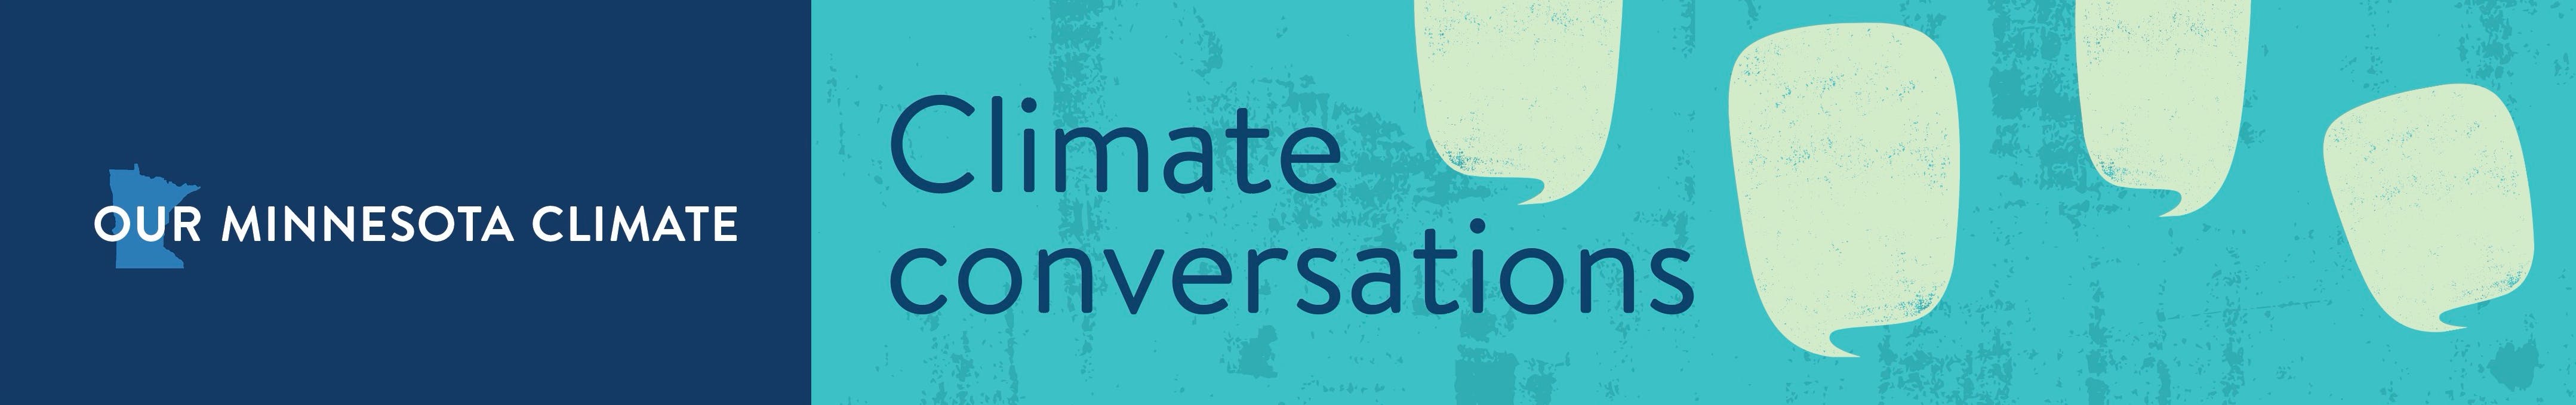 Our Minnesota Climate banner - Climate Conversations with speech bubble graphics